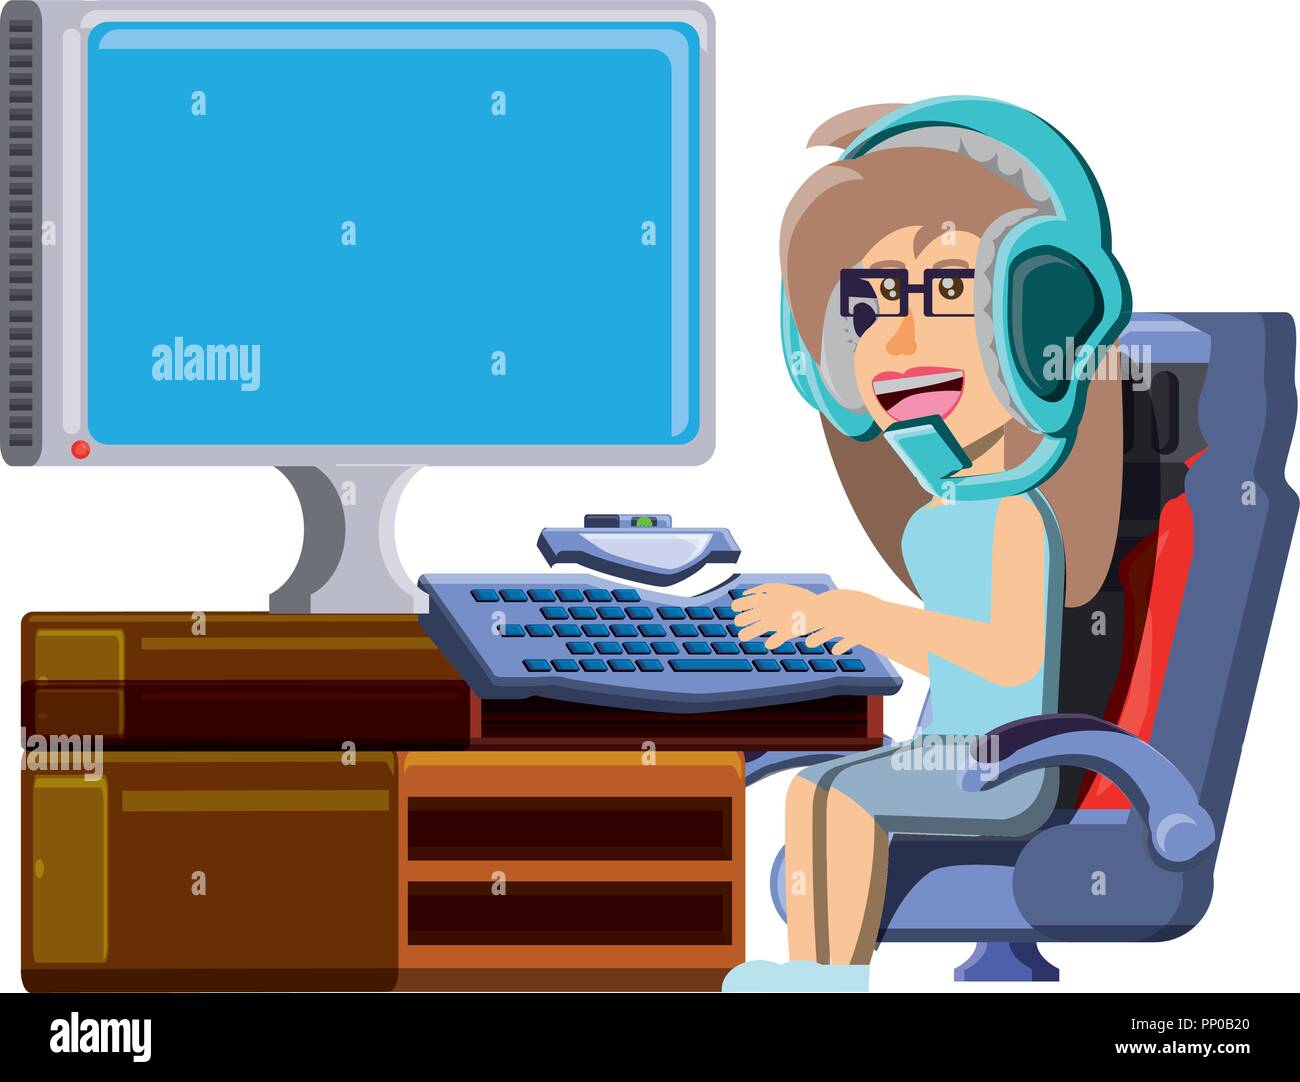 cartoon woman playing videogames on computer over white background, vector illustration Stock Vector